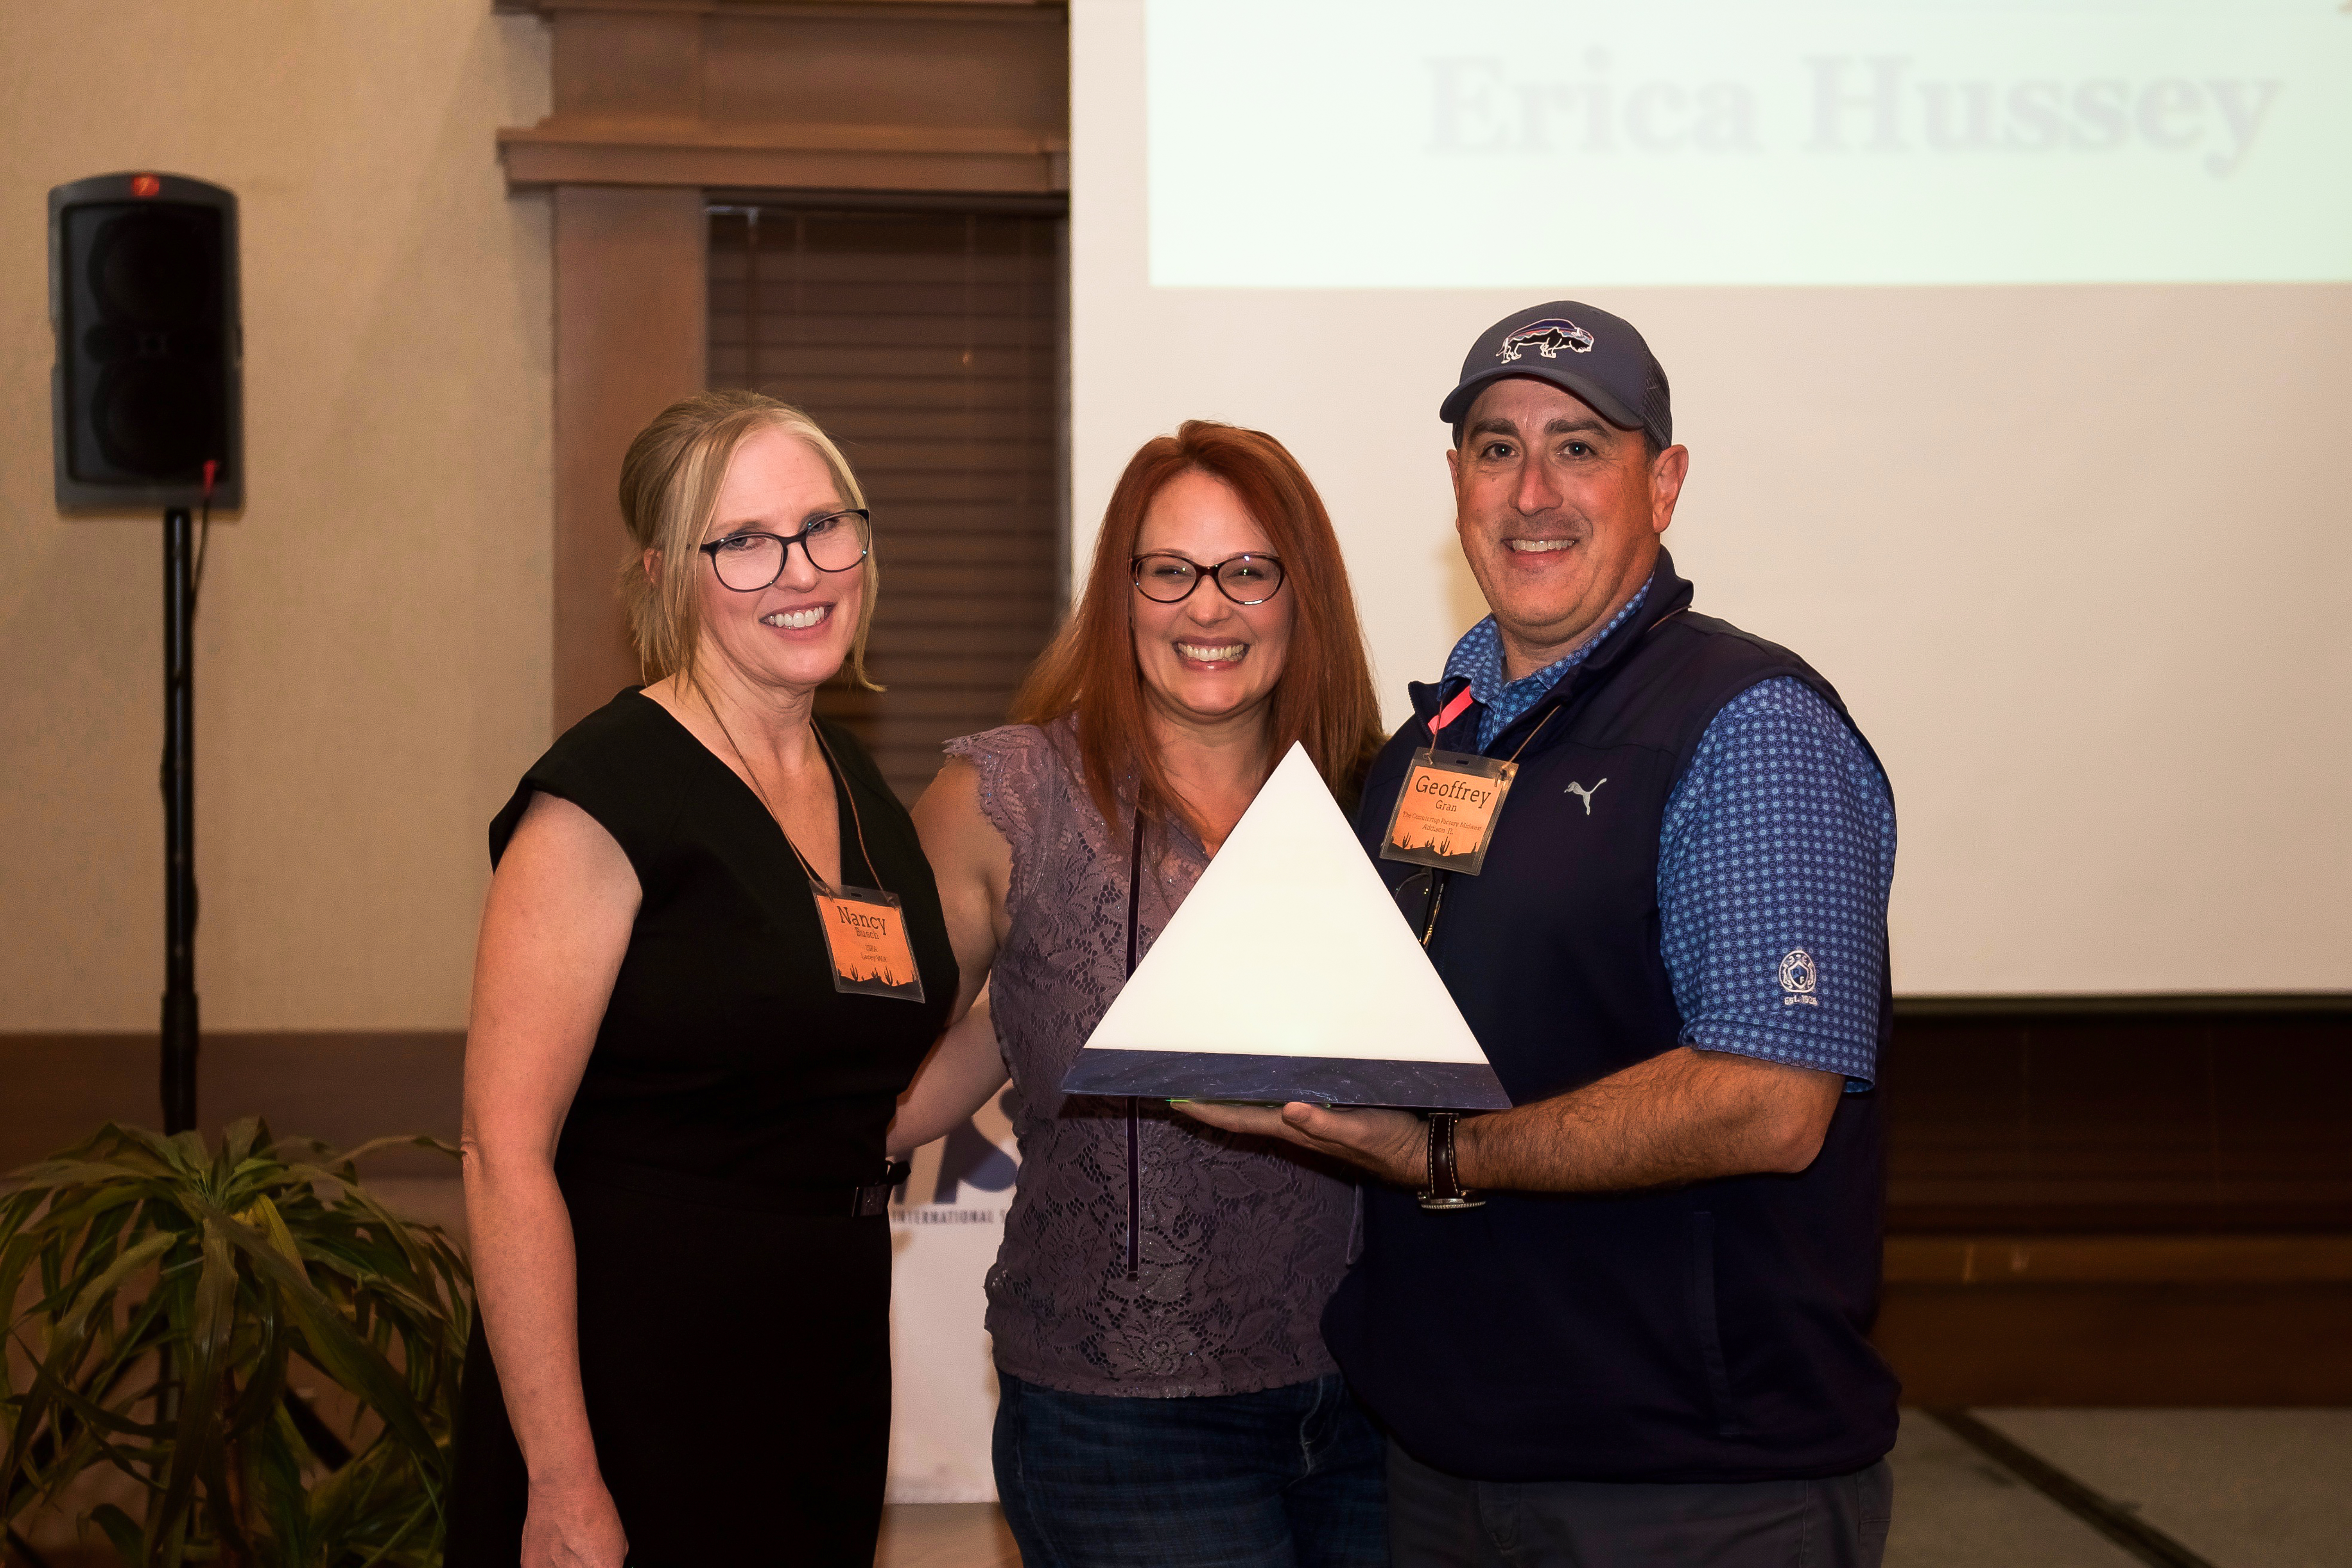 Nancy Busch, executive director, and Geoffrey Gran, The Countertop Factory Midwest and 2020 Fabricator of the Year Award winner, present Erica Hussey of J.C.W. Countertops with the 2021 Fabricator of the Year Award.